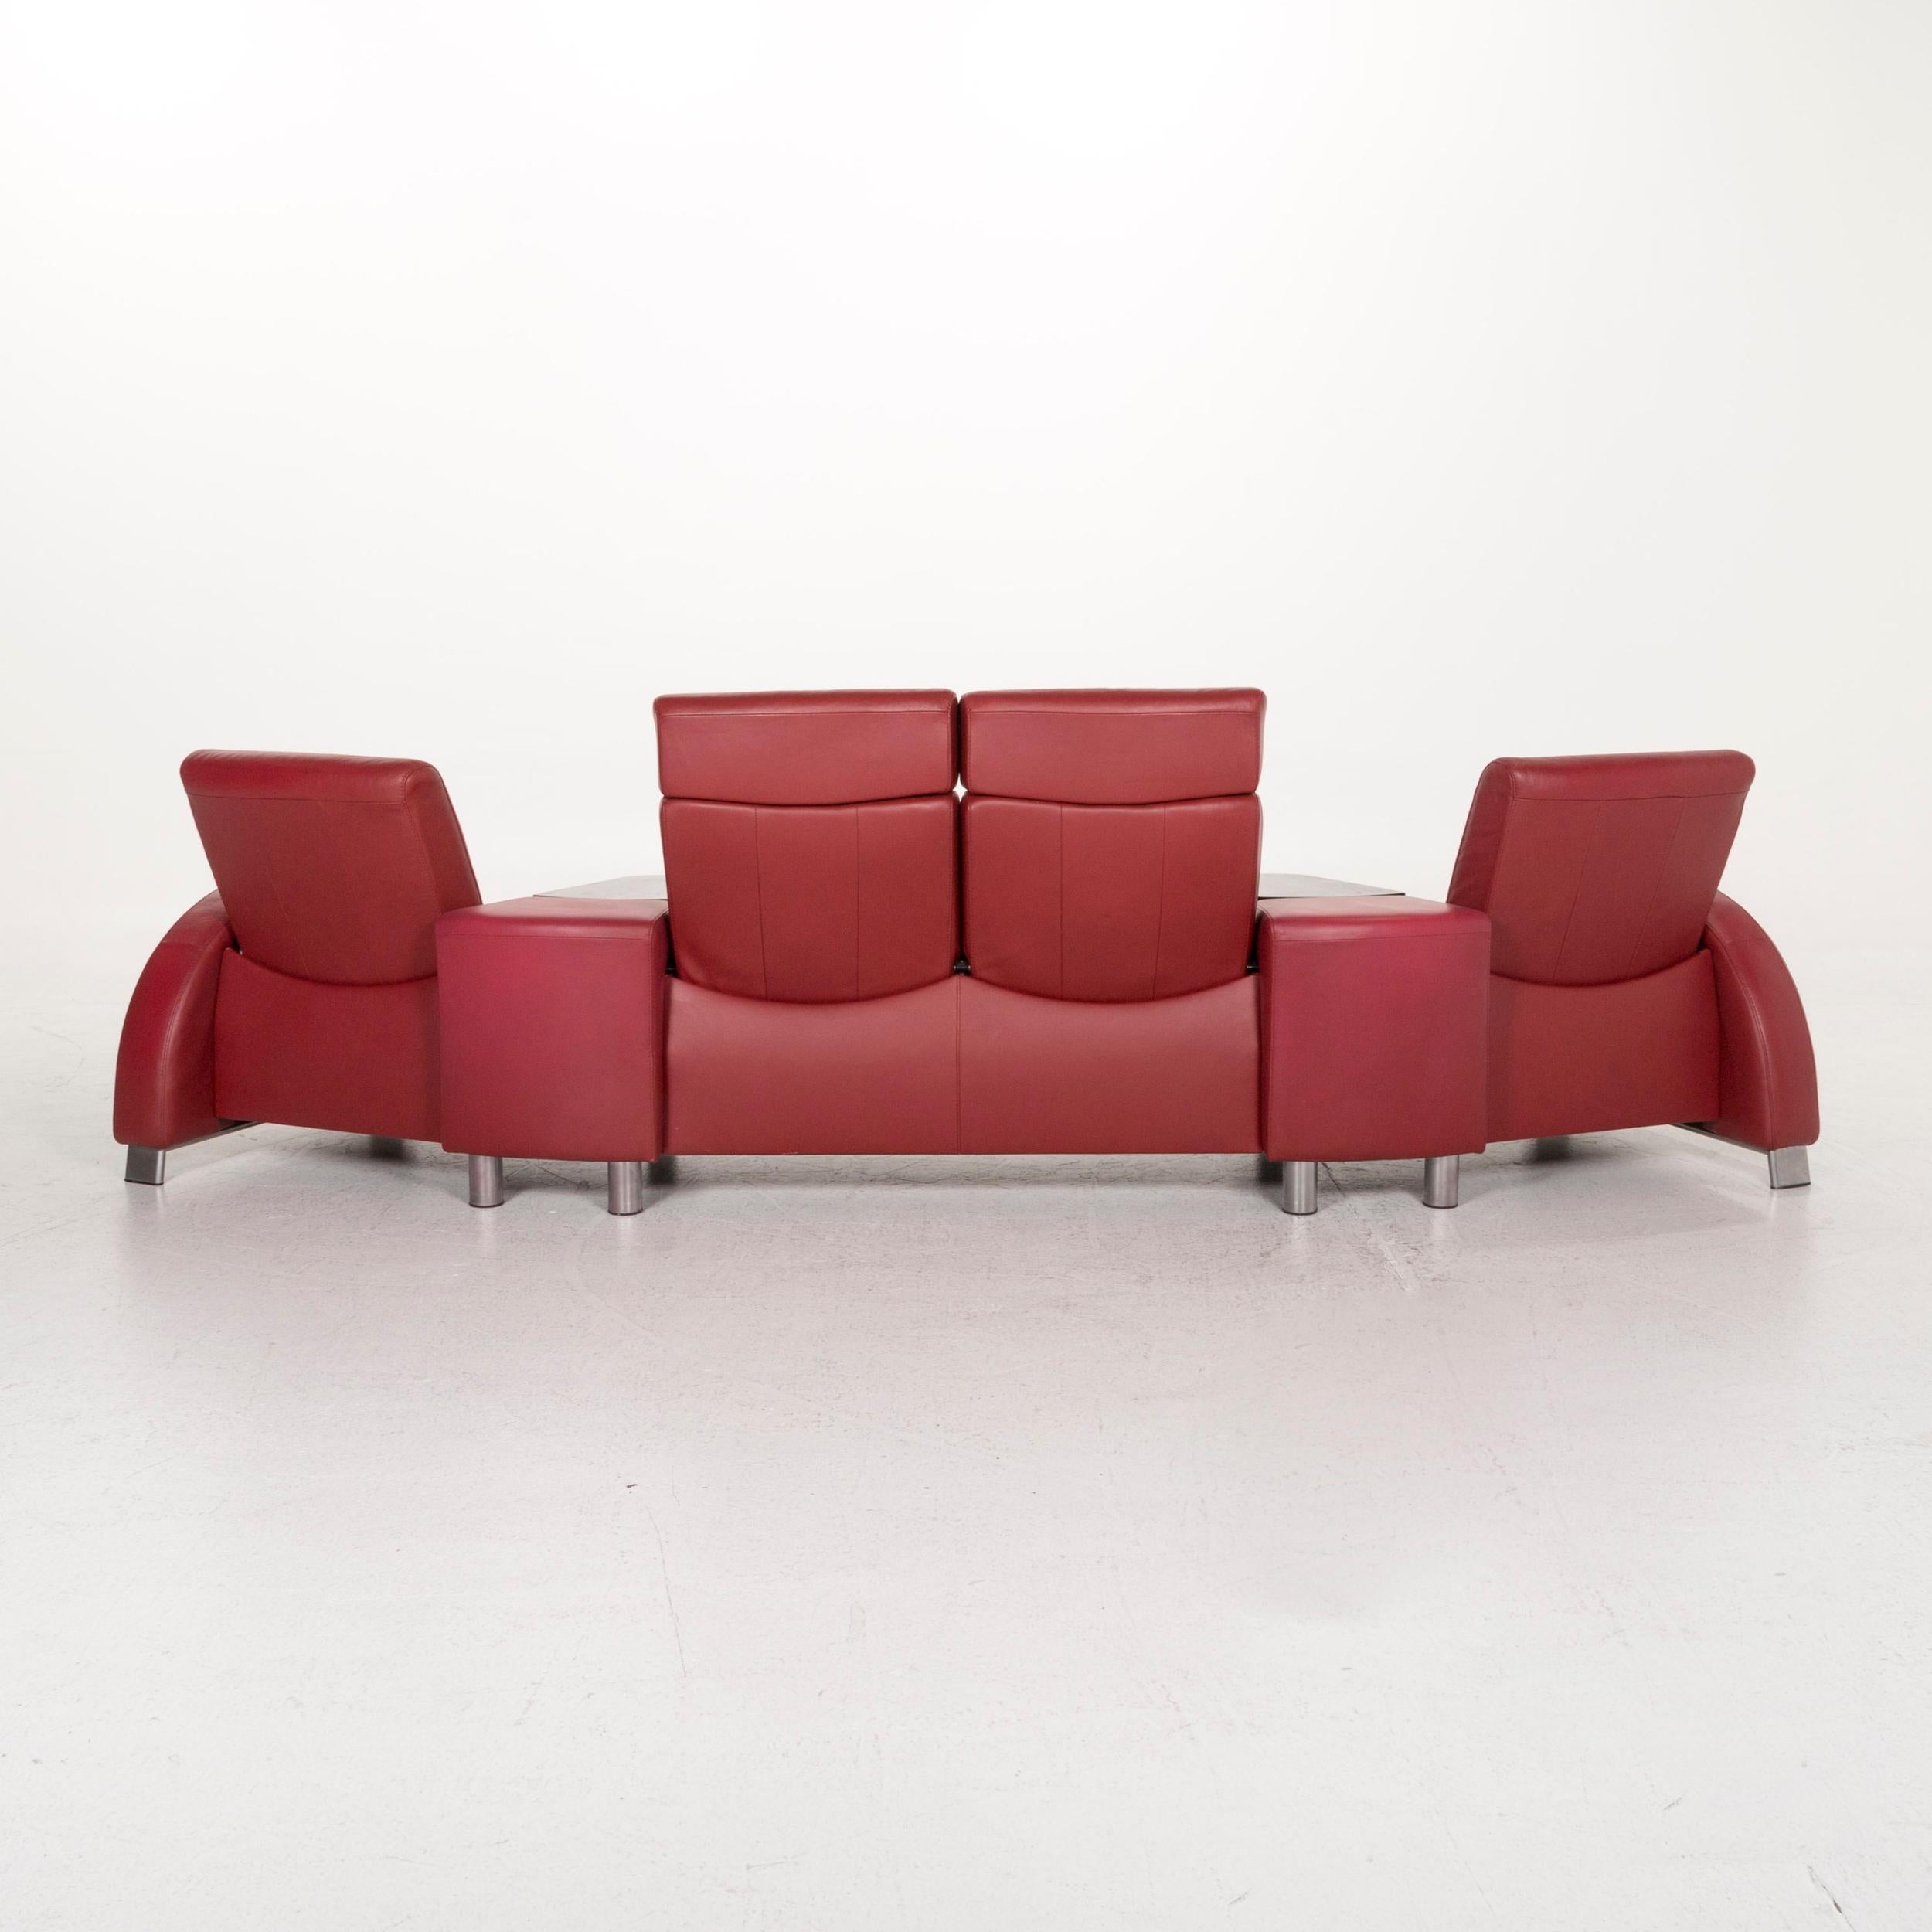 Stressless Arion Leather Sofa Red Four-Seat Function Home Theater 12